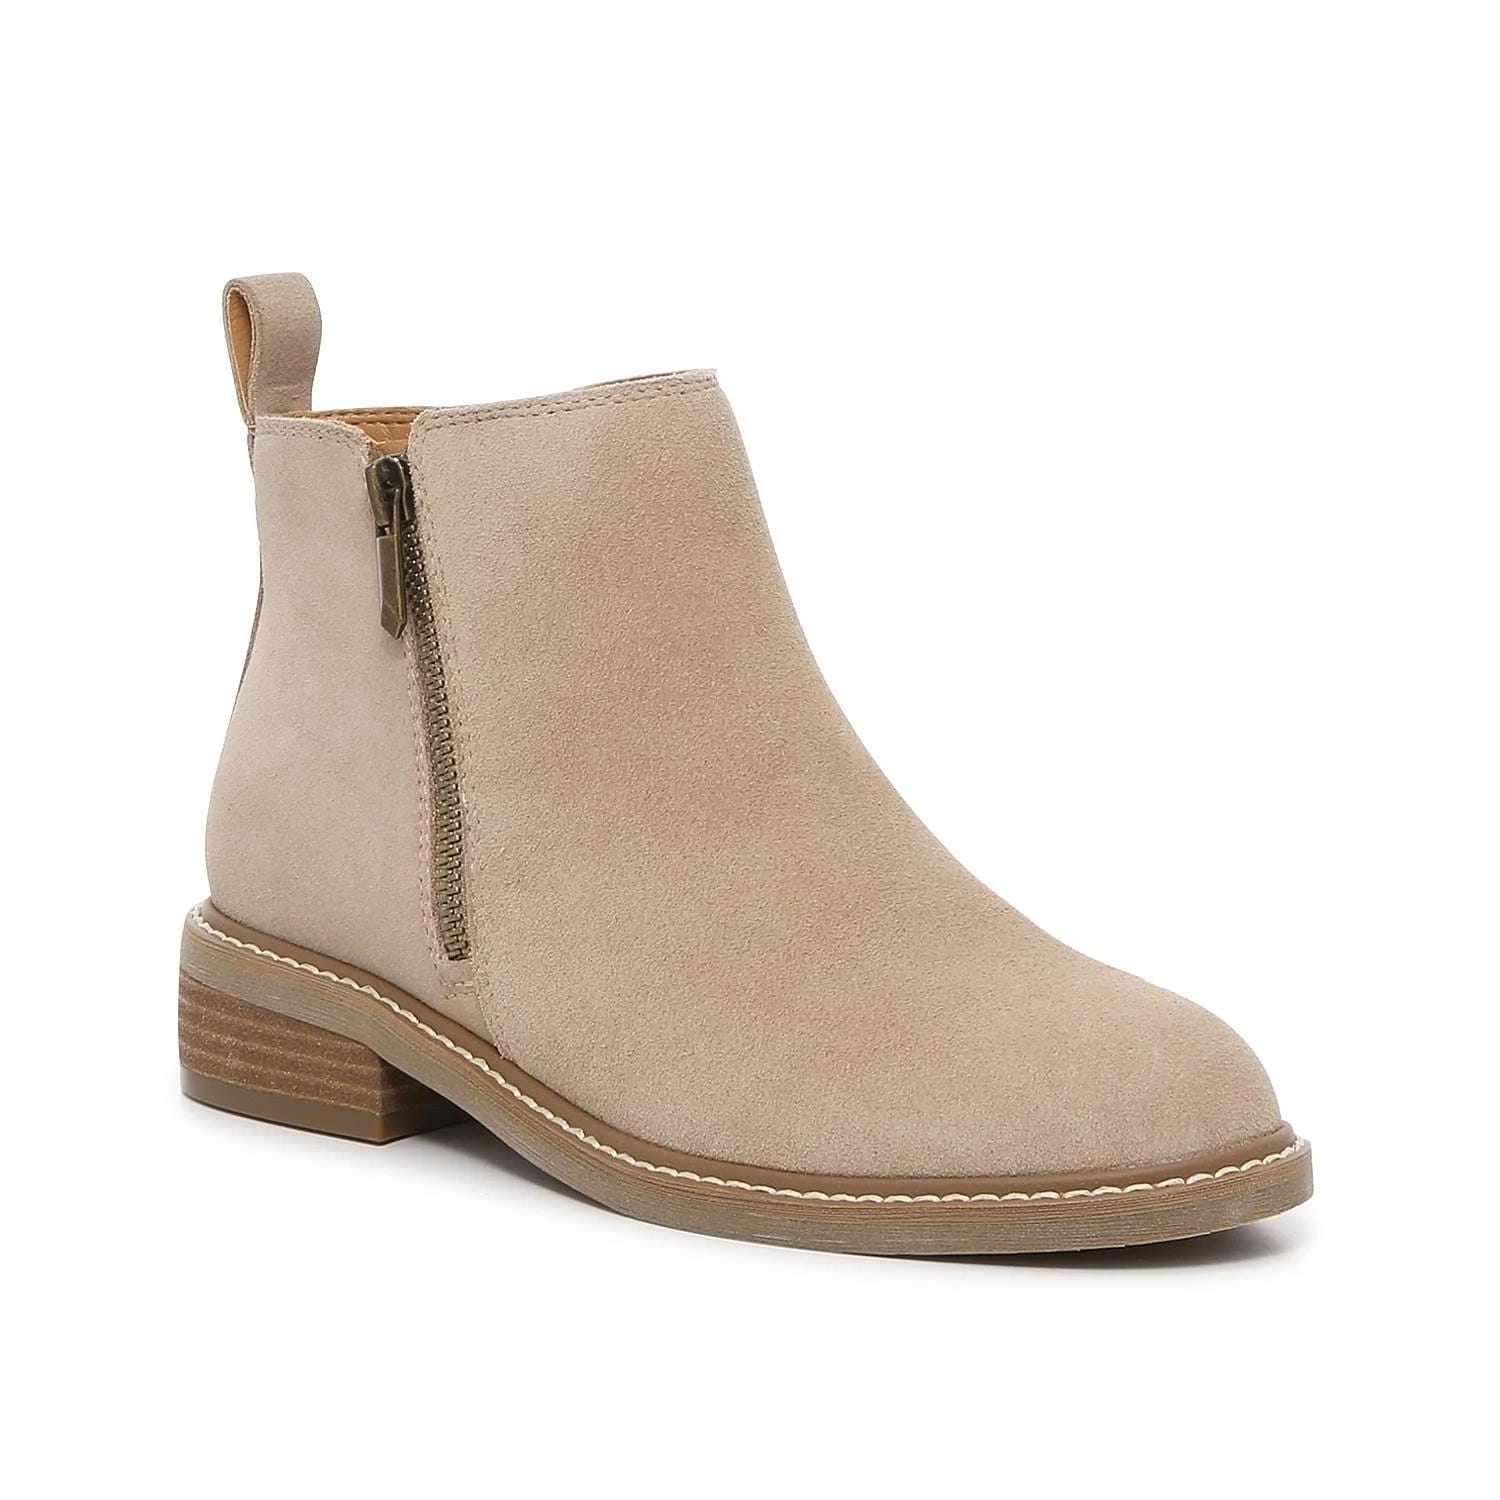 Stylish Taupe Ankle Booties with Heel | Image